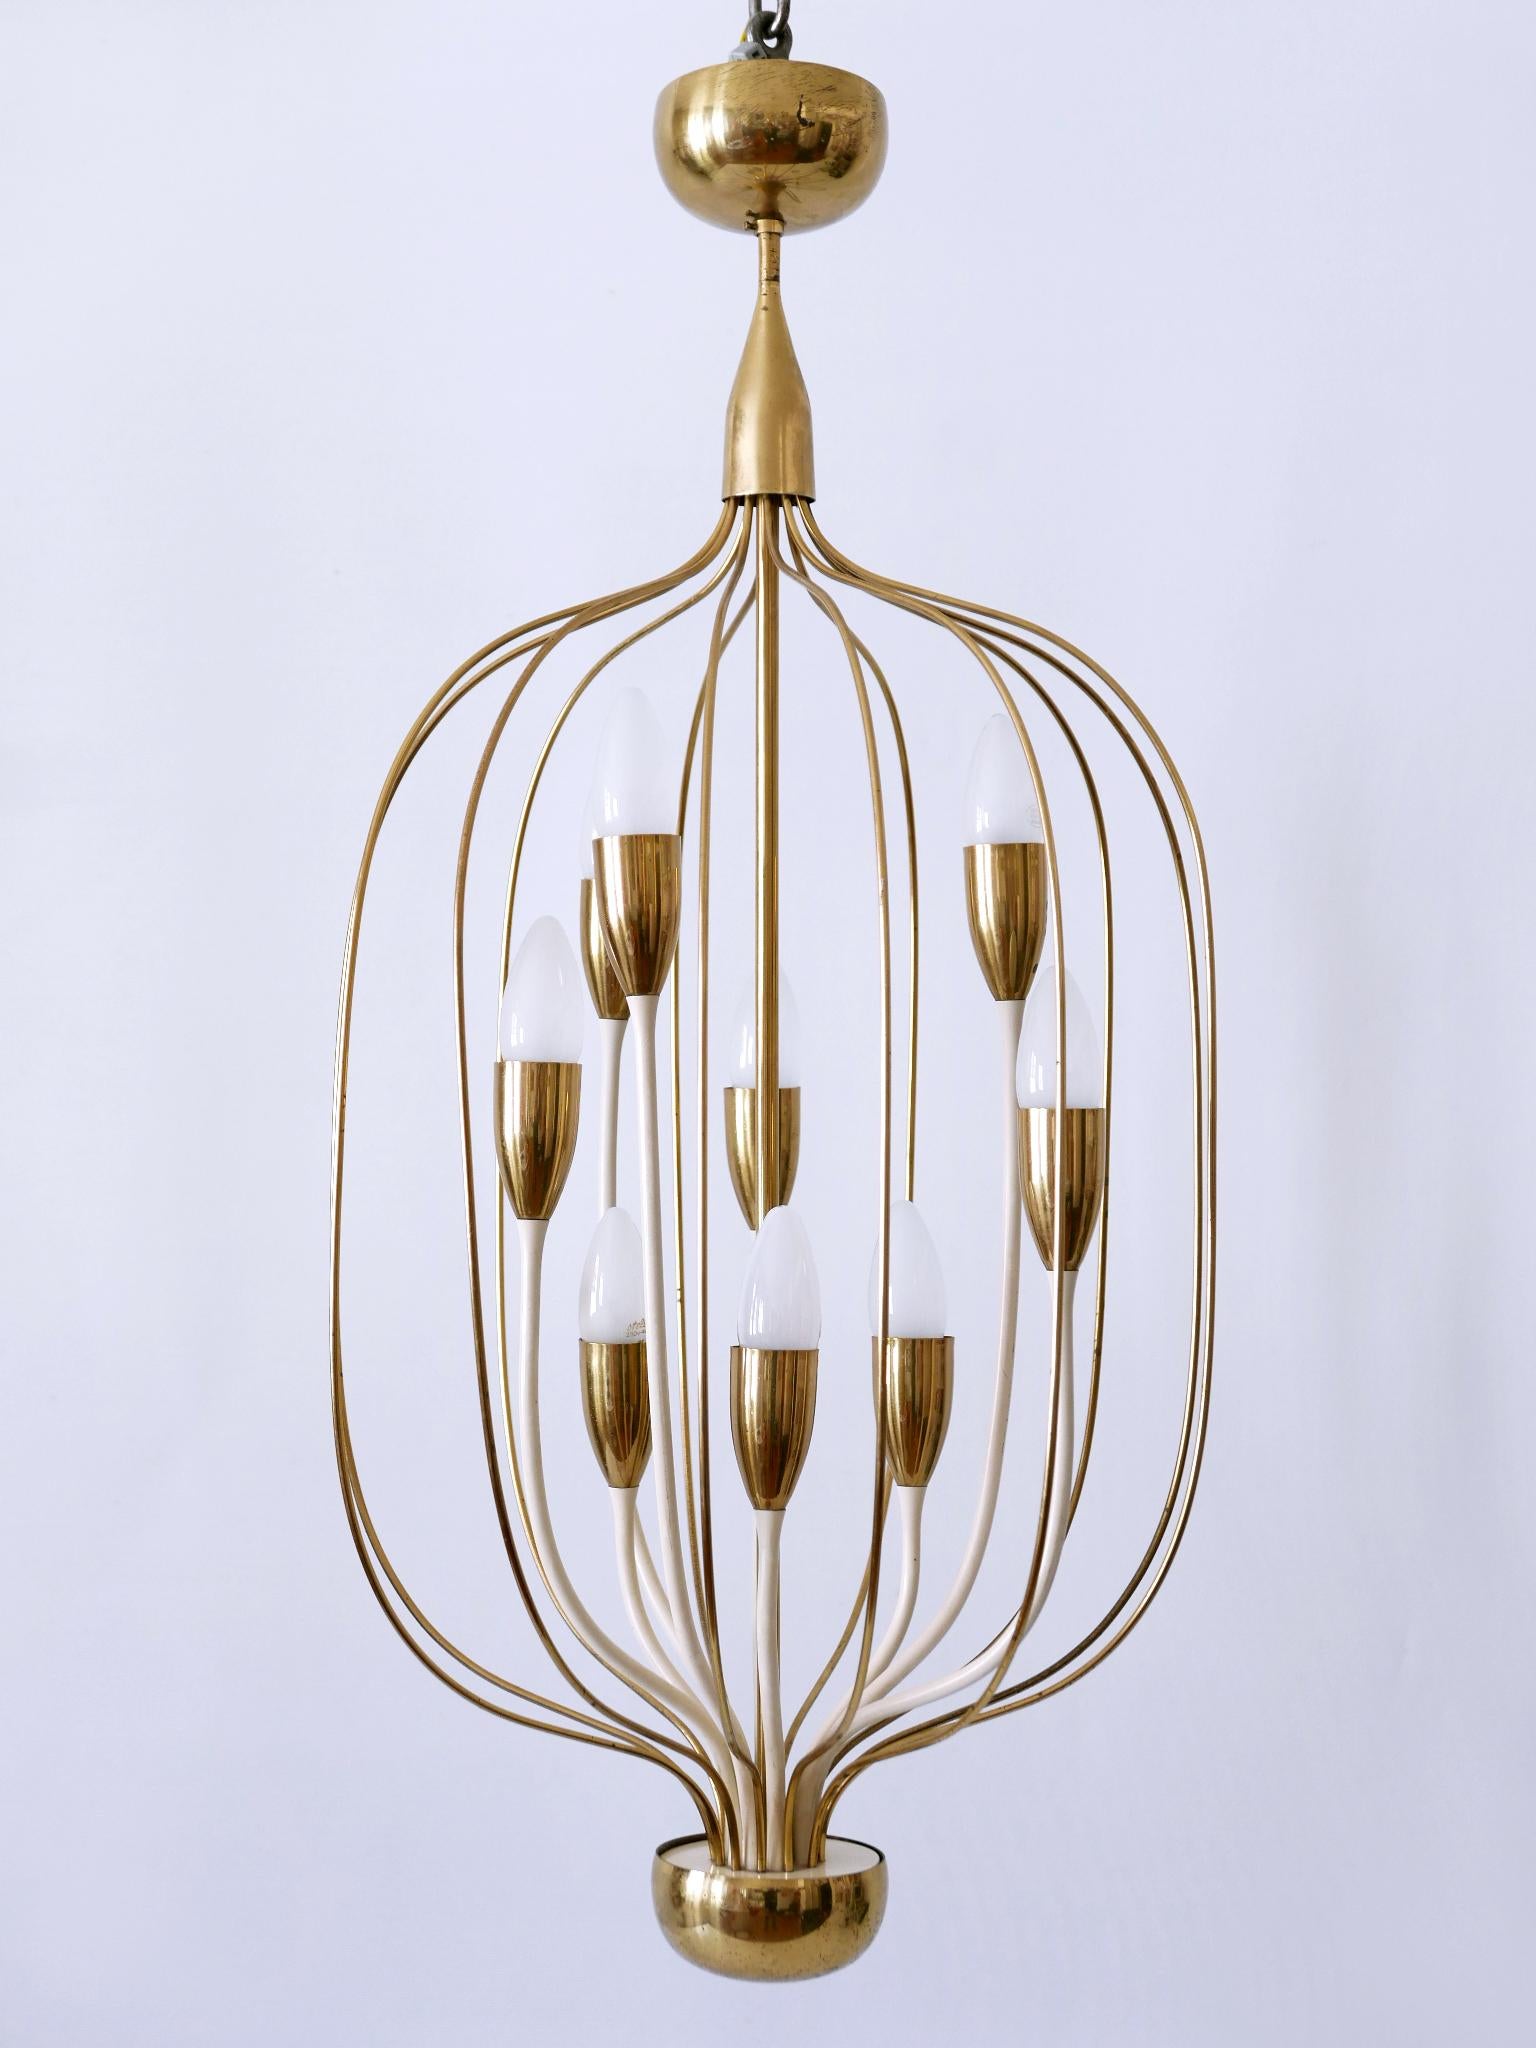 Exceptional Mid-Century Modern Nine-Flamed Chandelier or Pendant Lamp 1950s For Sale 1